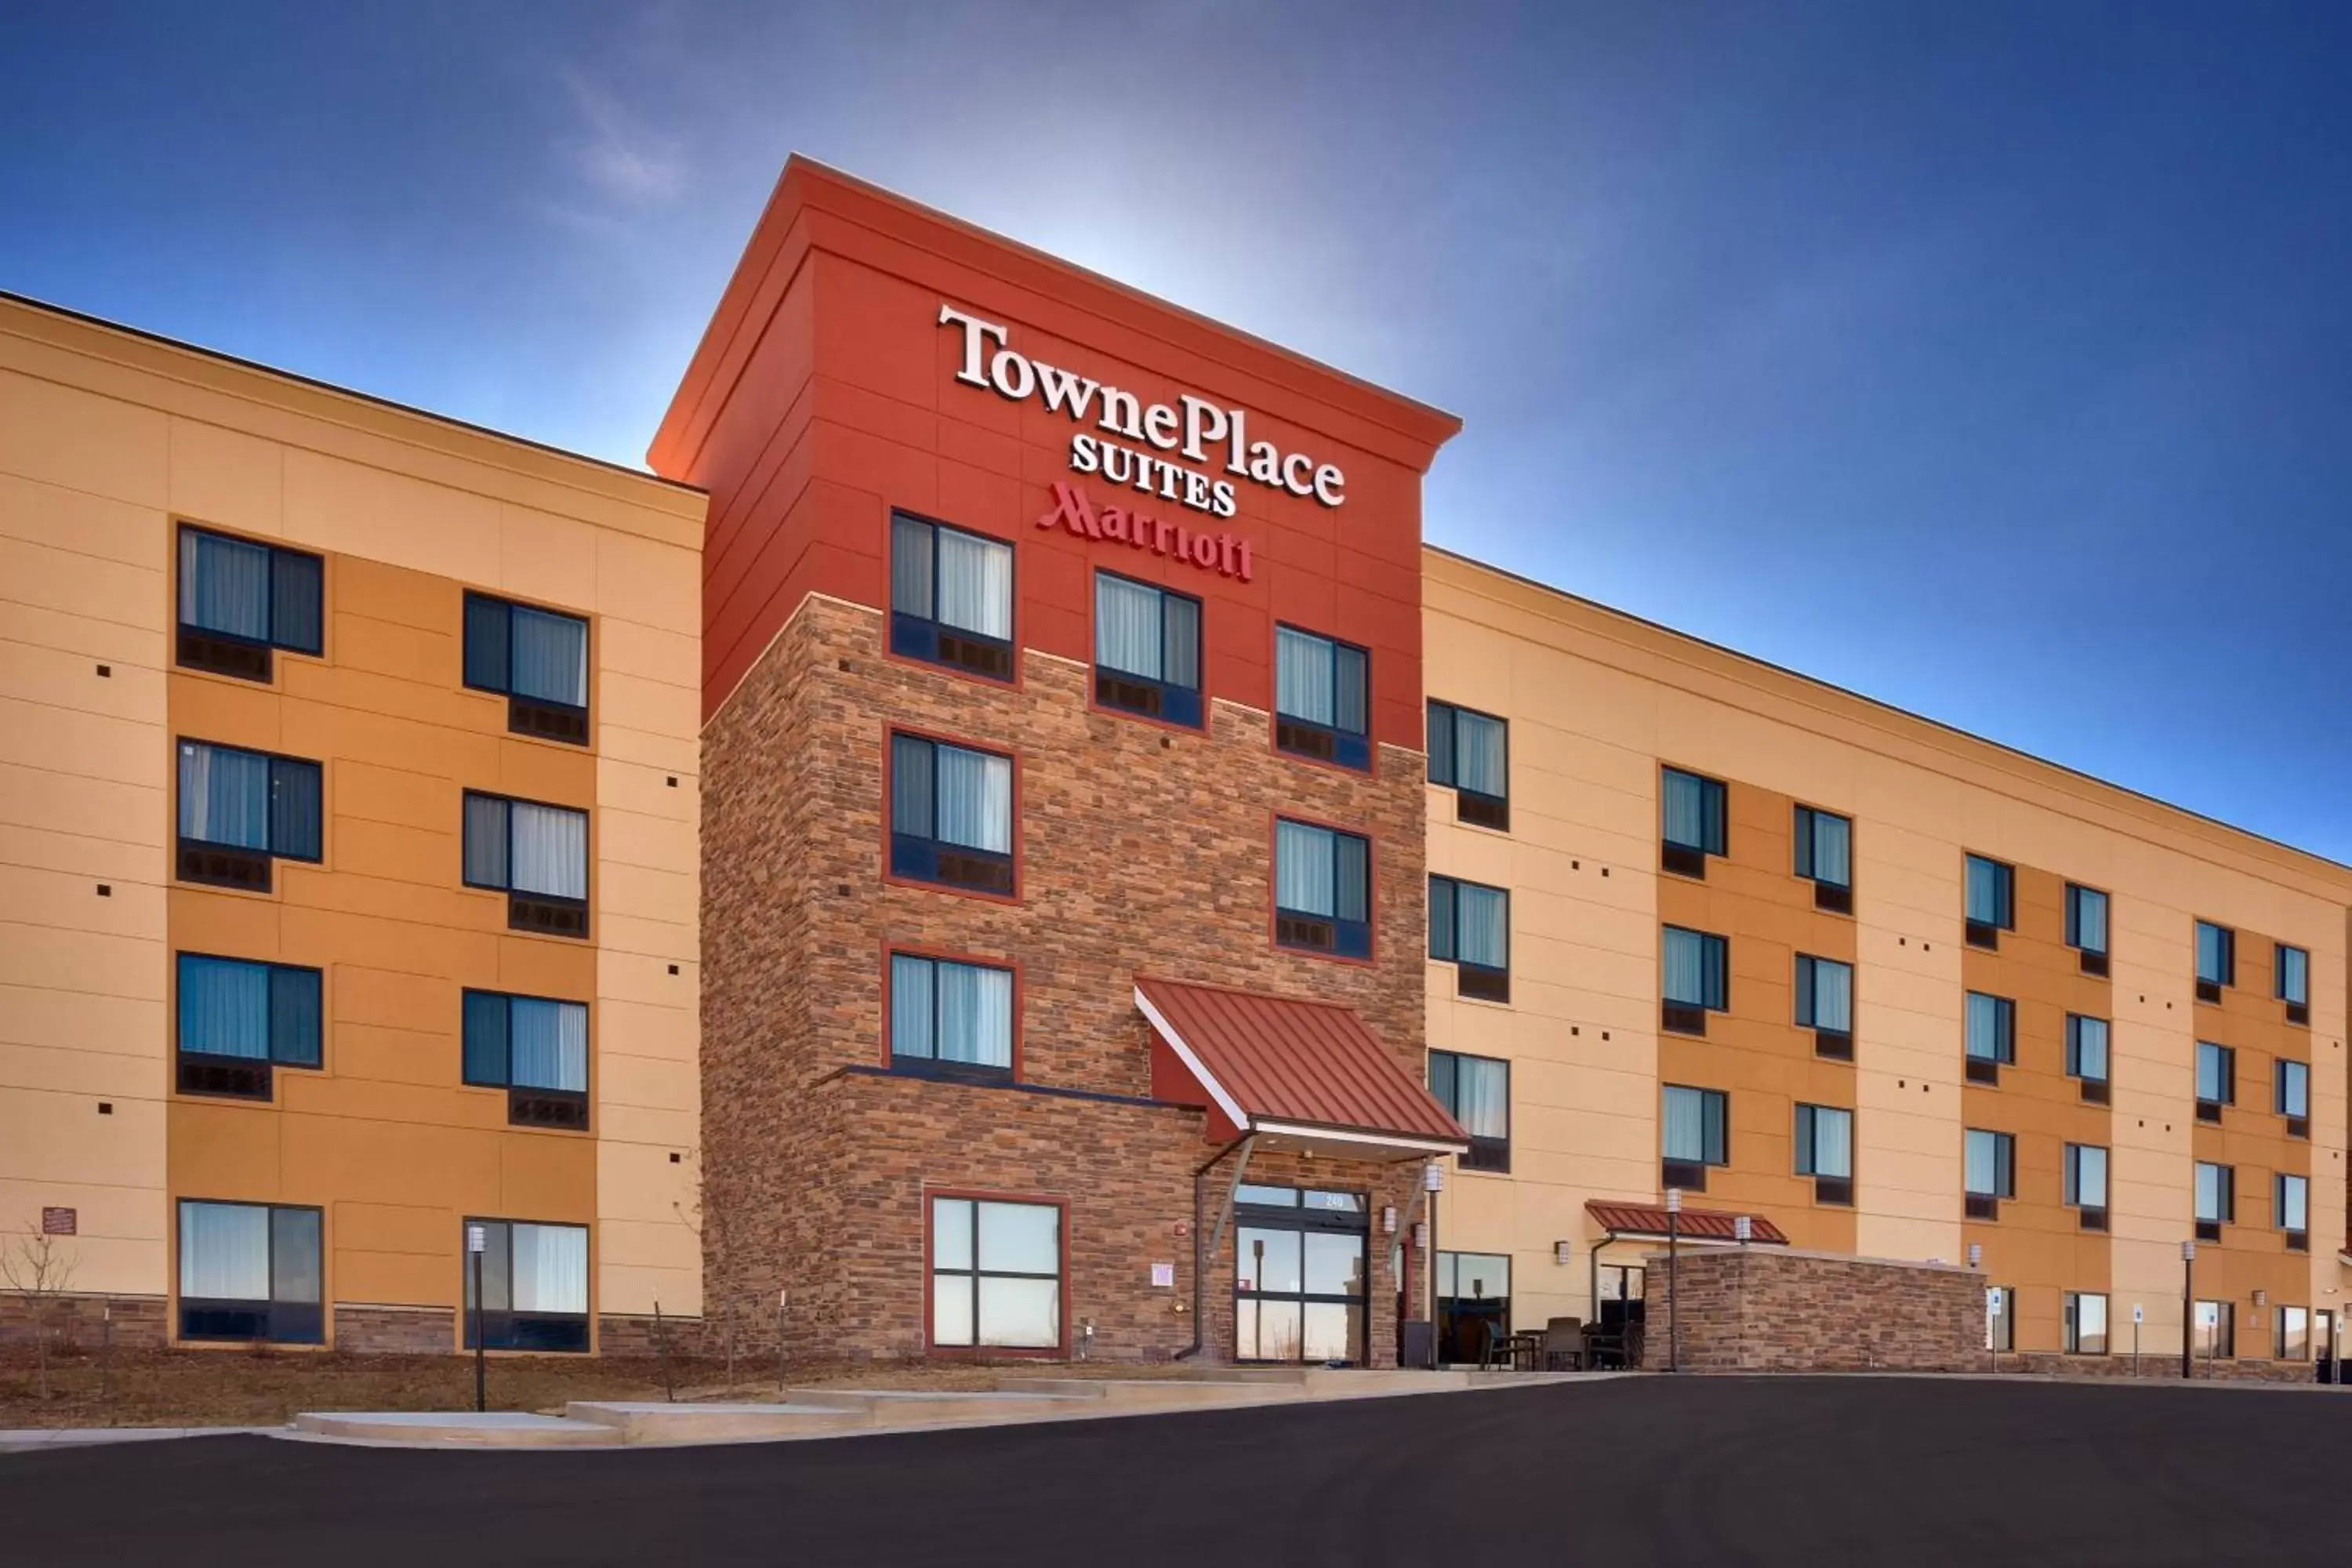 Property Building in TownePlace Suites by Marriott Dickinson